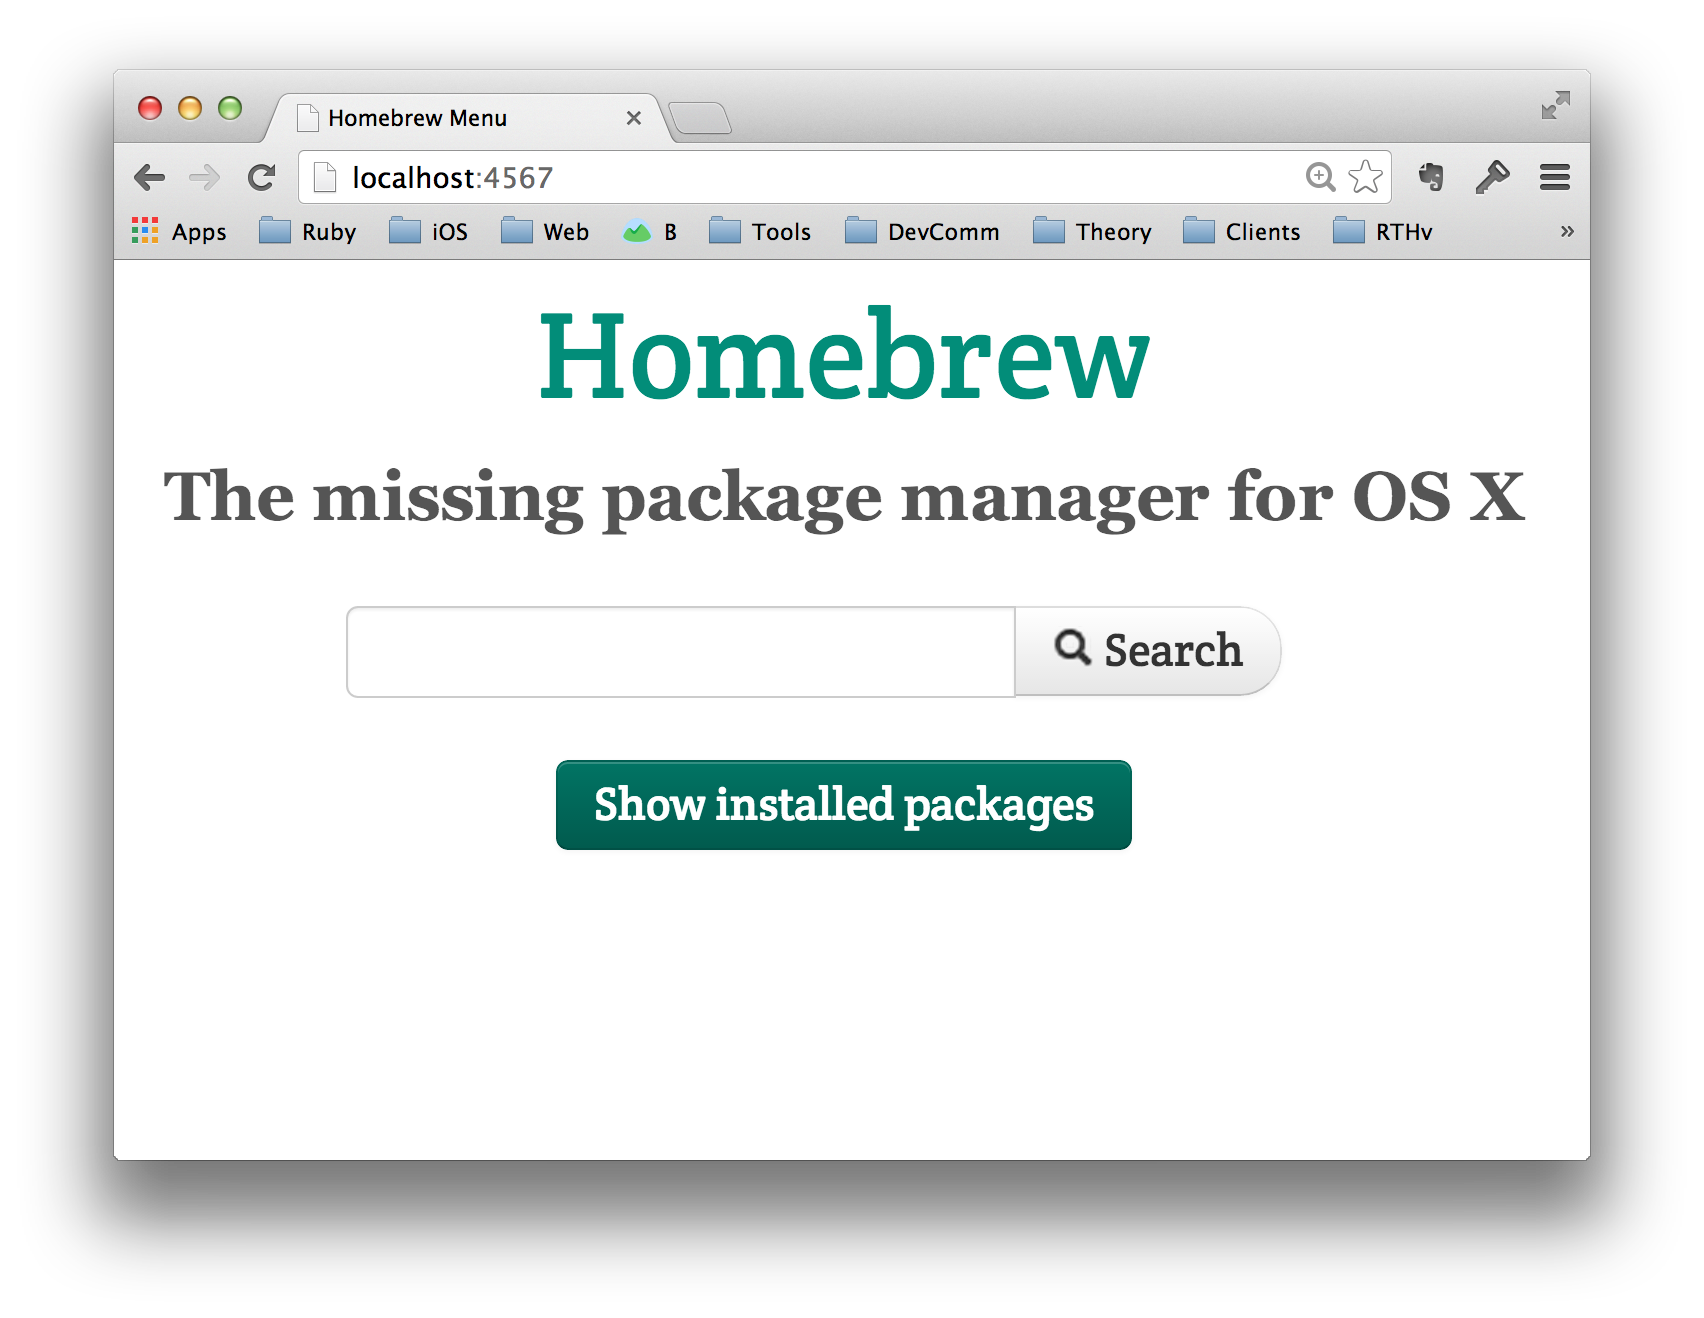 Browsing locally-installed Homebrew packages.